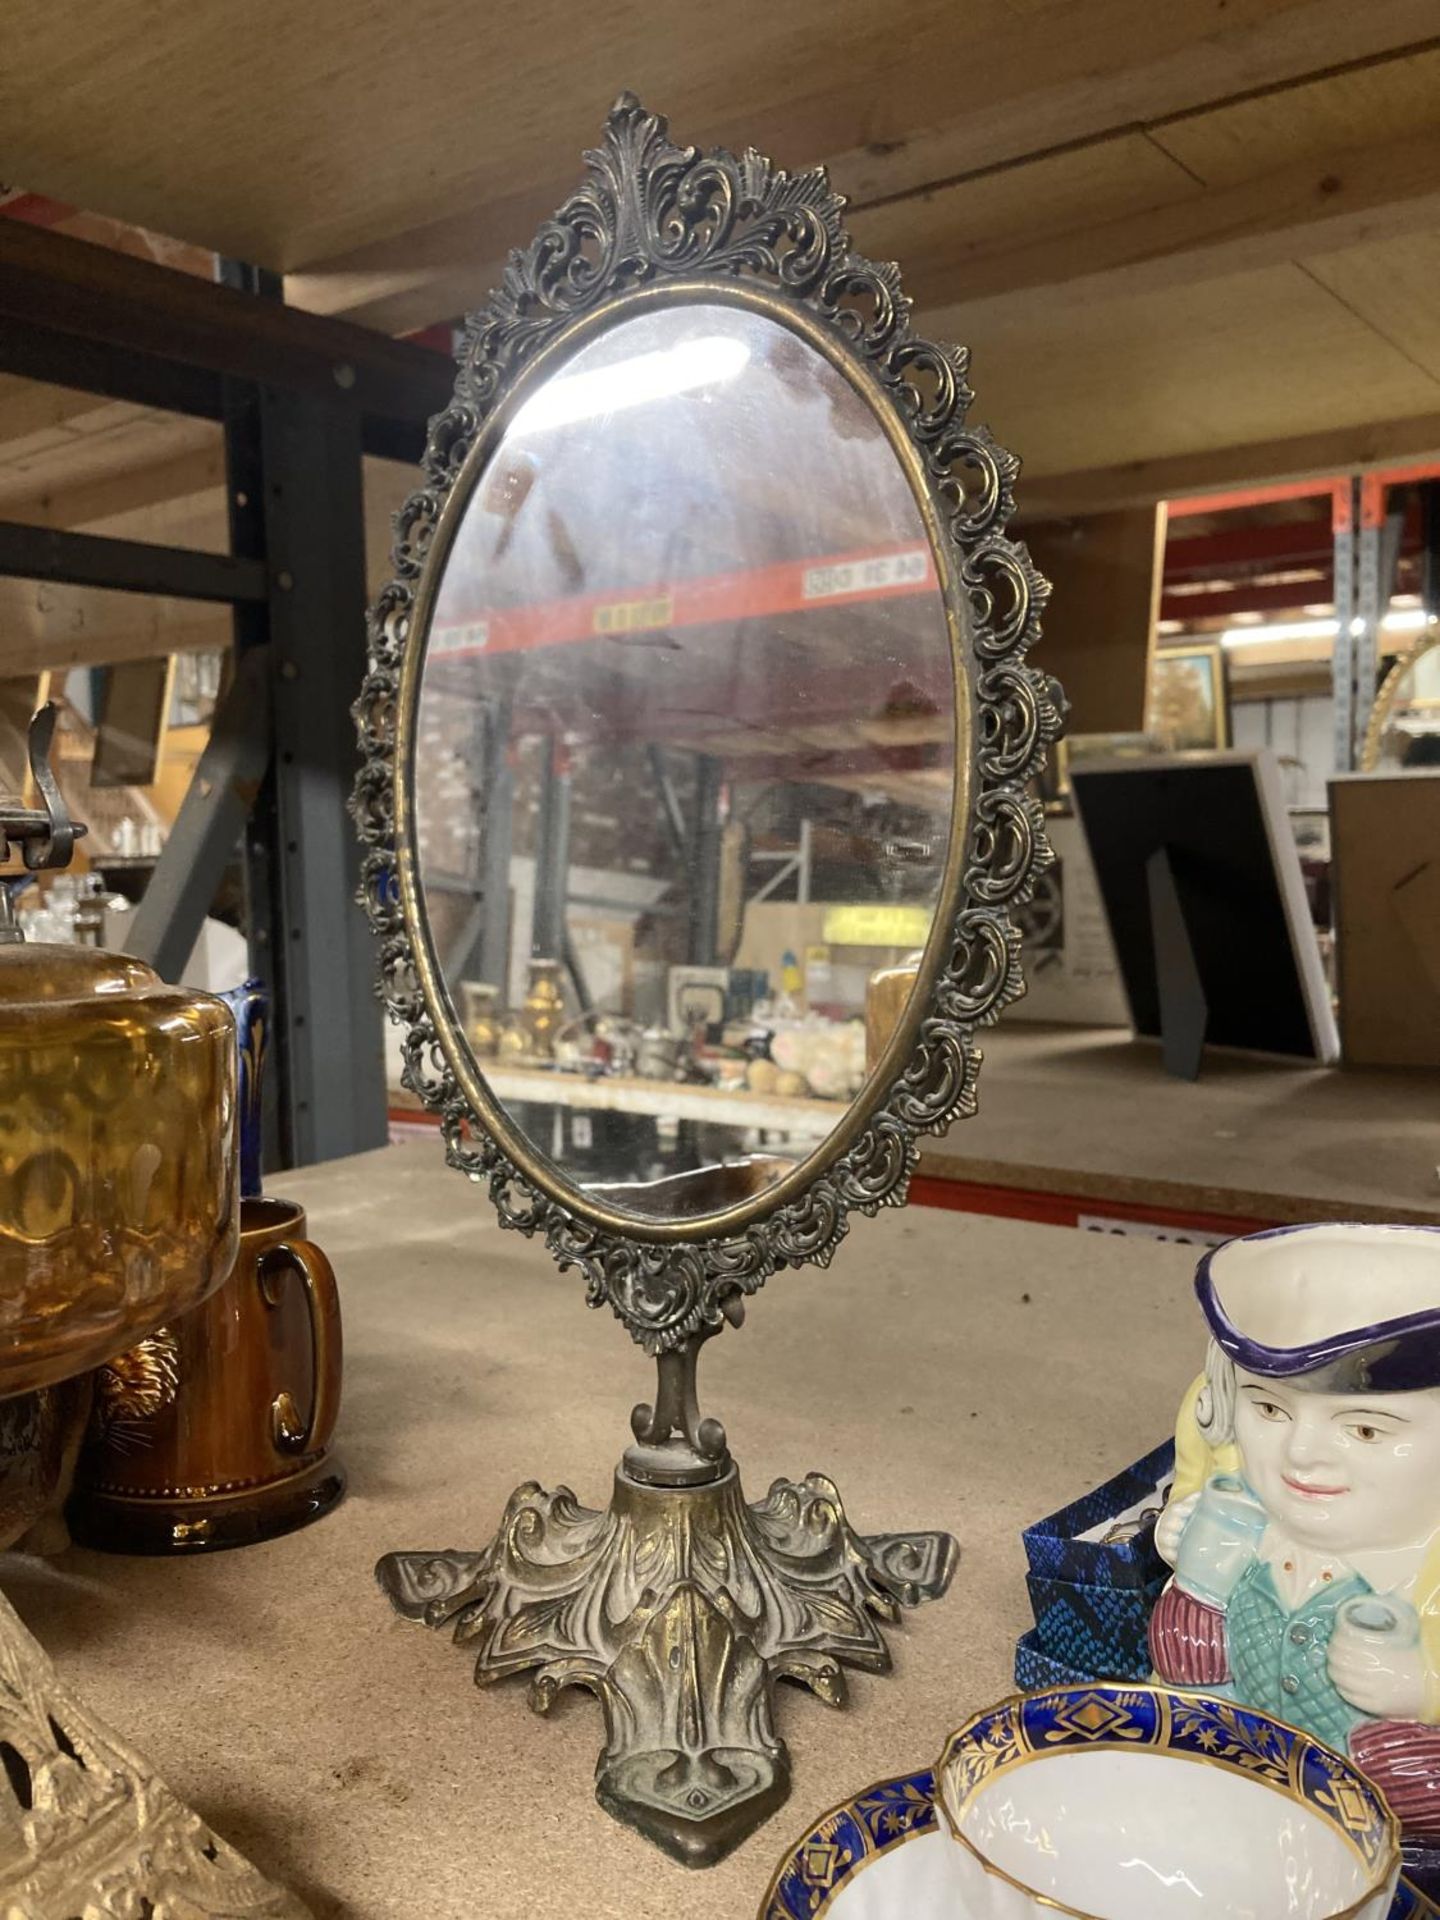 A VINTAGE OIL LAMP WITH AMBER GLASS RESERVOIR AND A DECORATIVE DRESSING TABLE MIRROR - Image 4 of 5